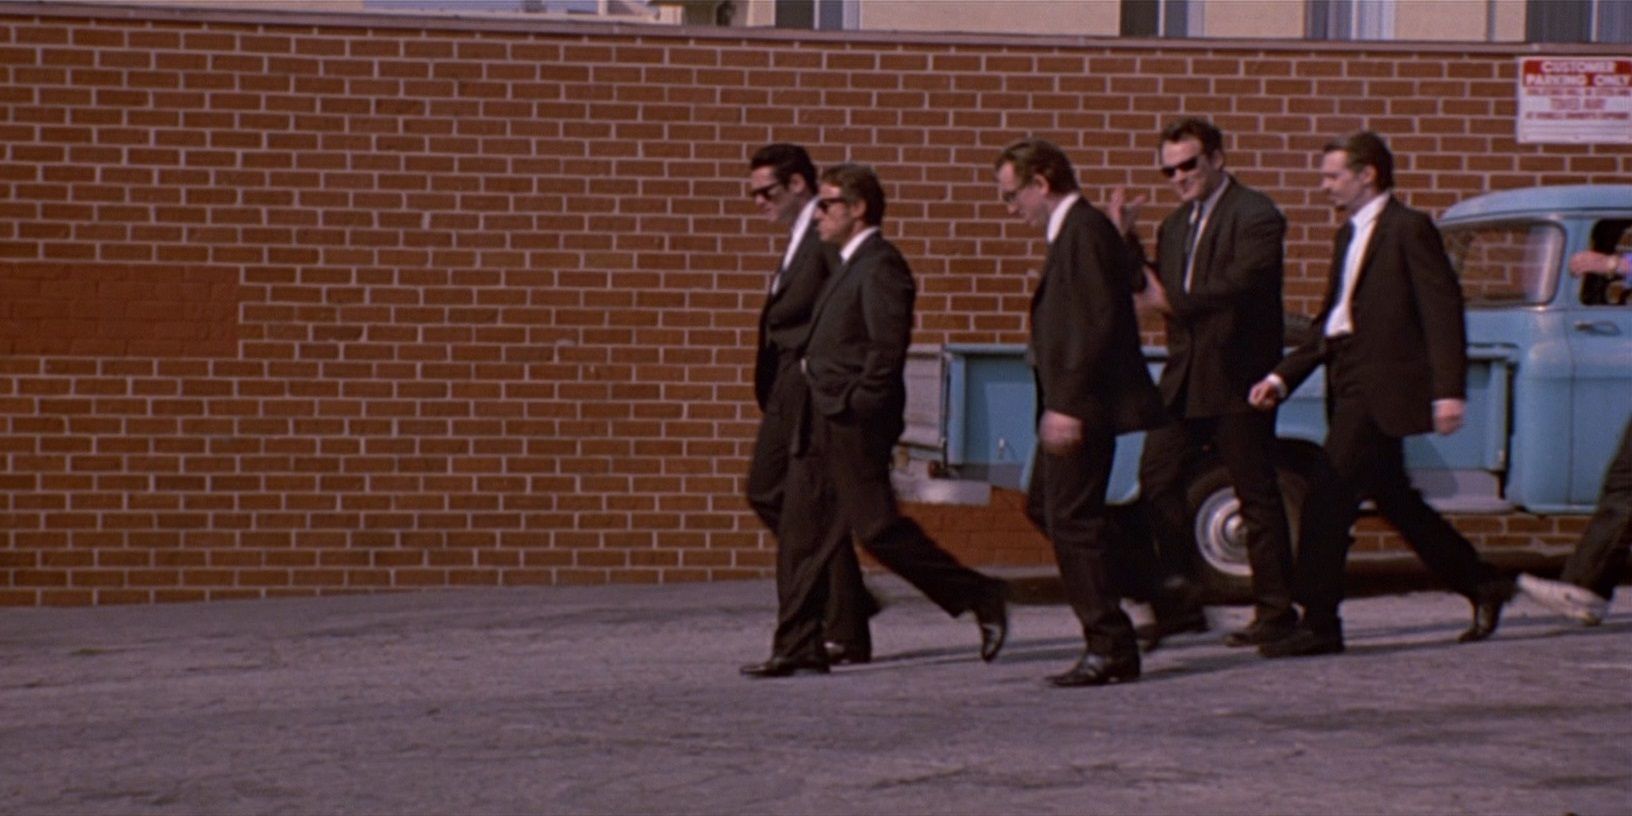 The guys walk through the parking lot in Reservoir Dogs